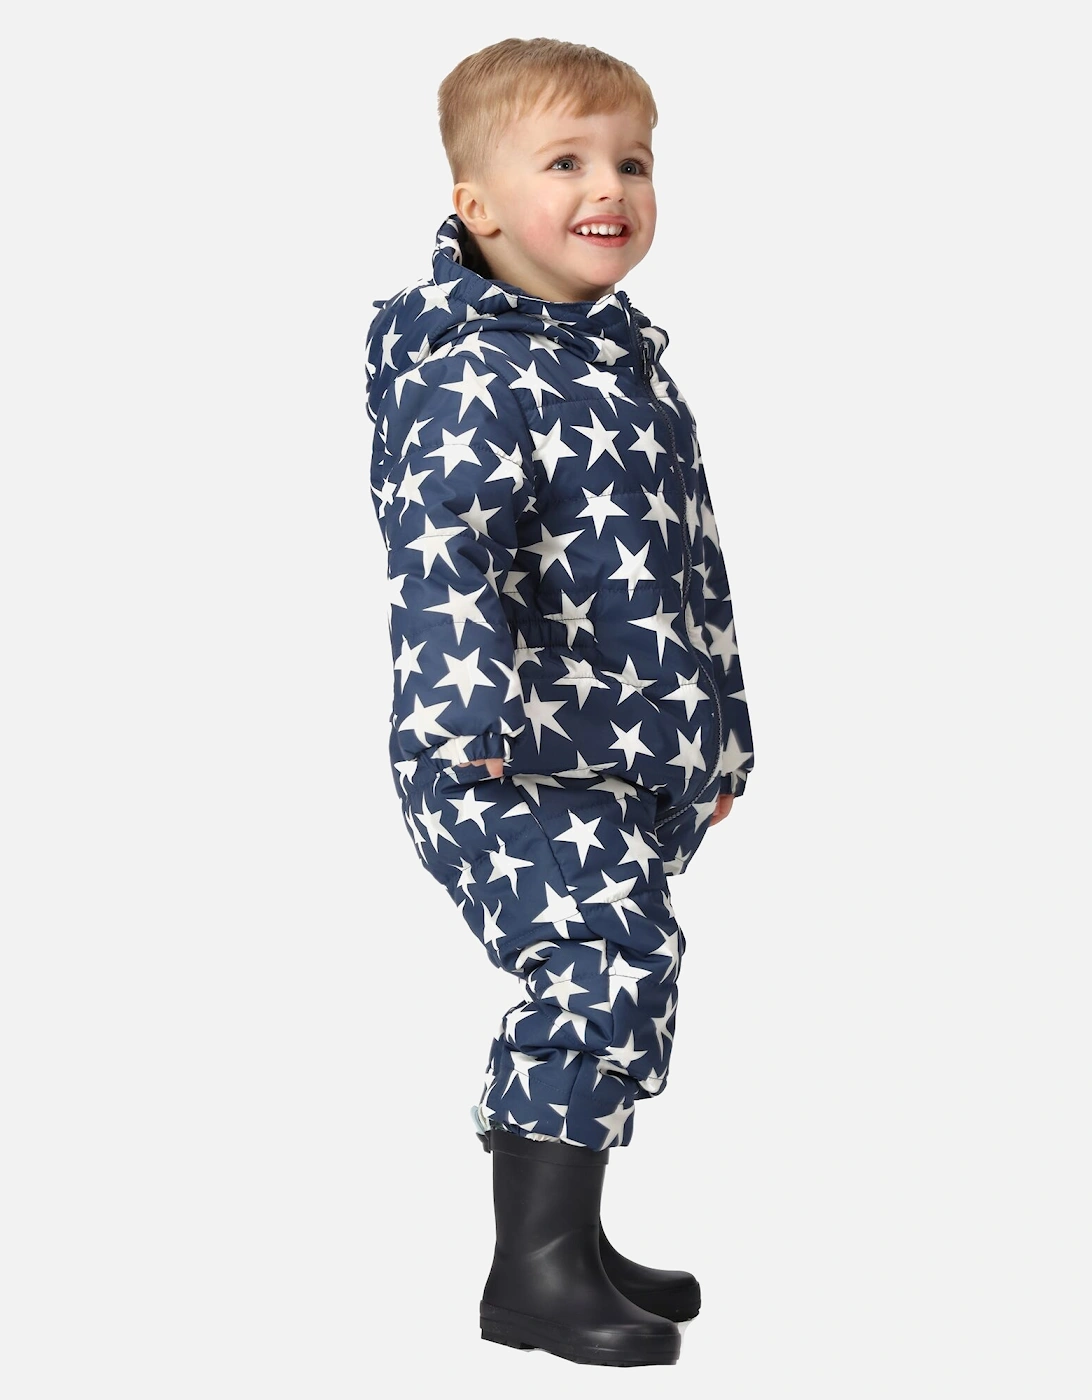 Baby Penrose Stars Puddle Suit